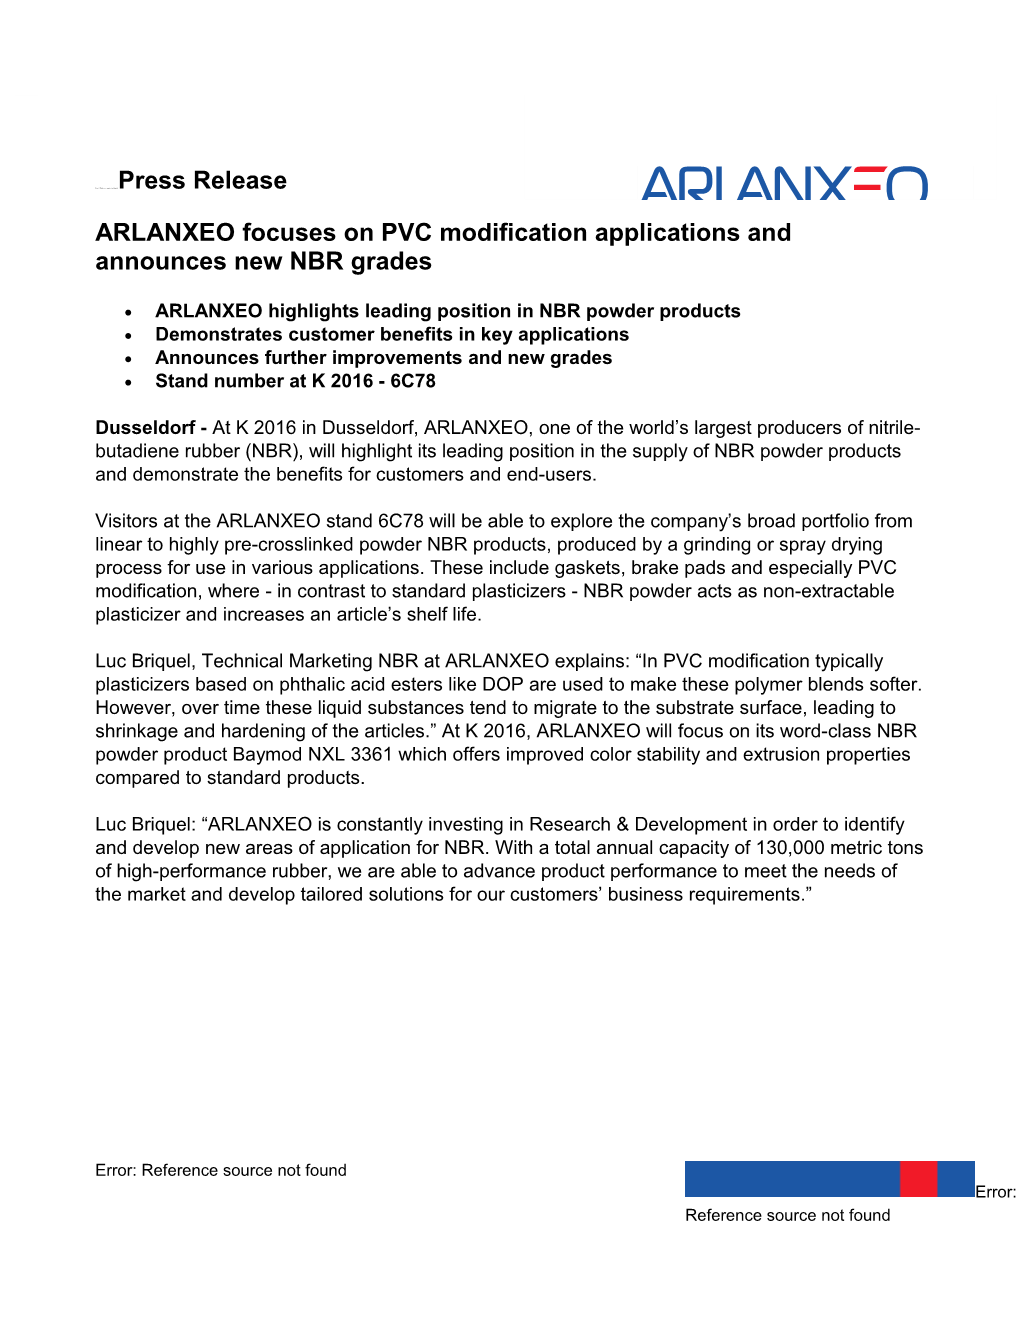 ARLANXEO Focuses on PVC Modification Applications and Announces New NBR Grades